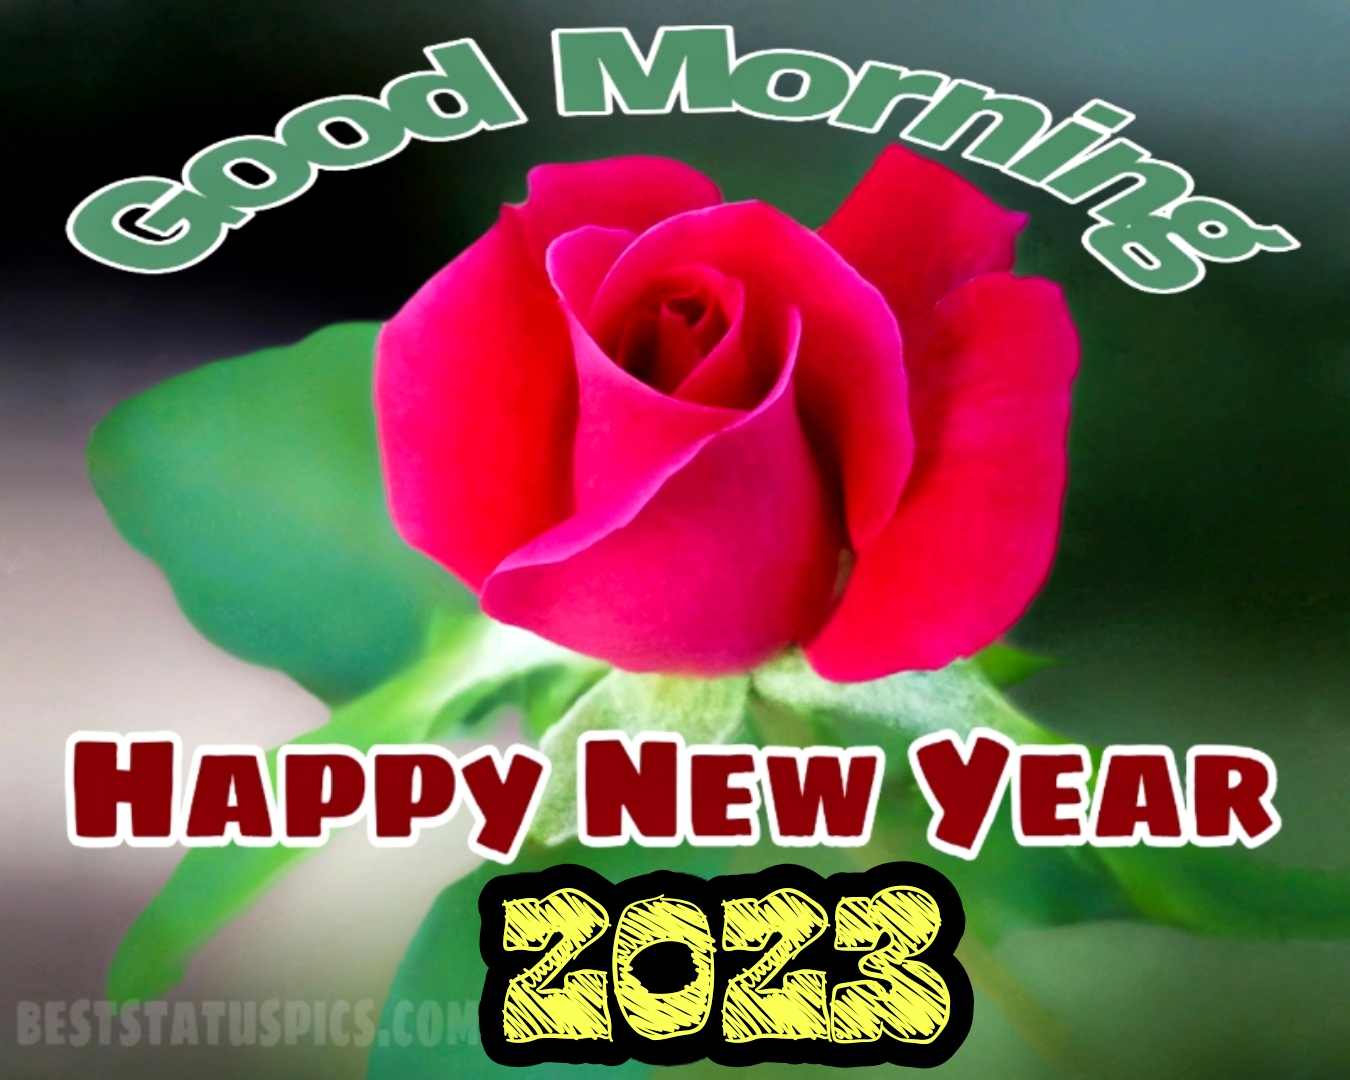 Good Morning and Happy New Year 2023 greeting card with red rose for love